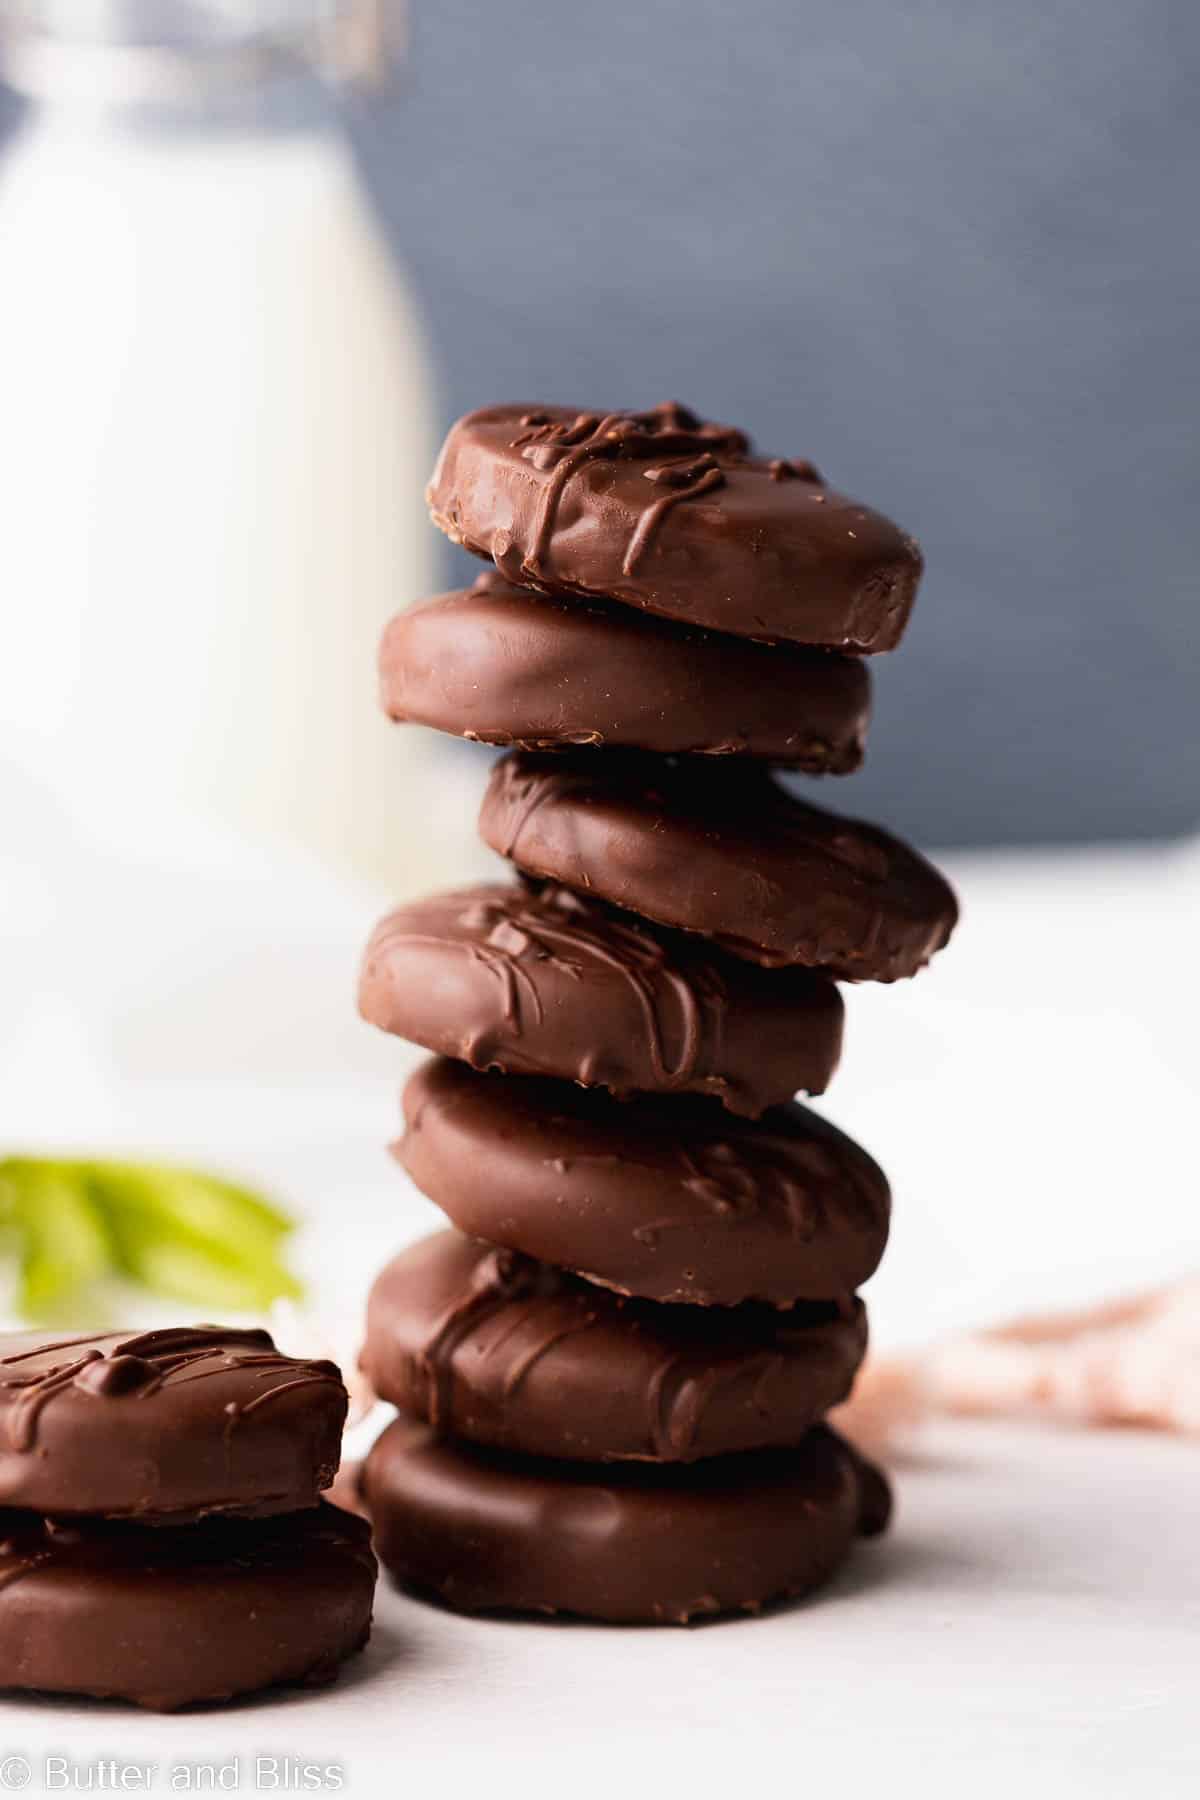 Tall stack of gluten free chocolate thin mint cookies set next to a glass of milk on a table.